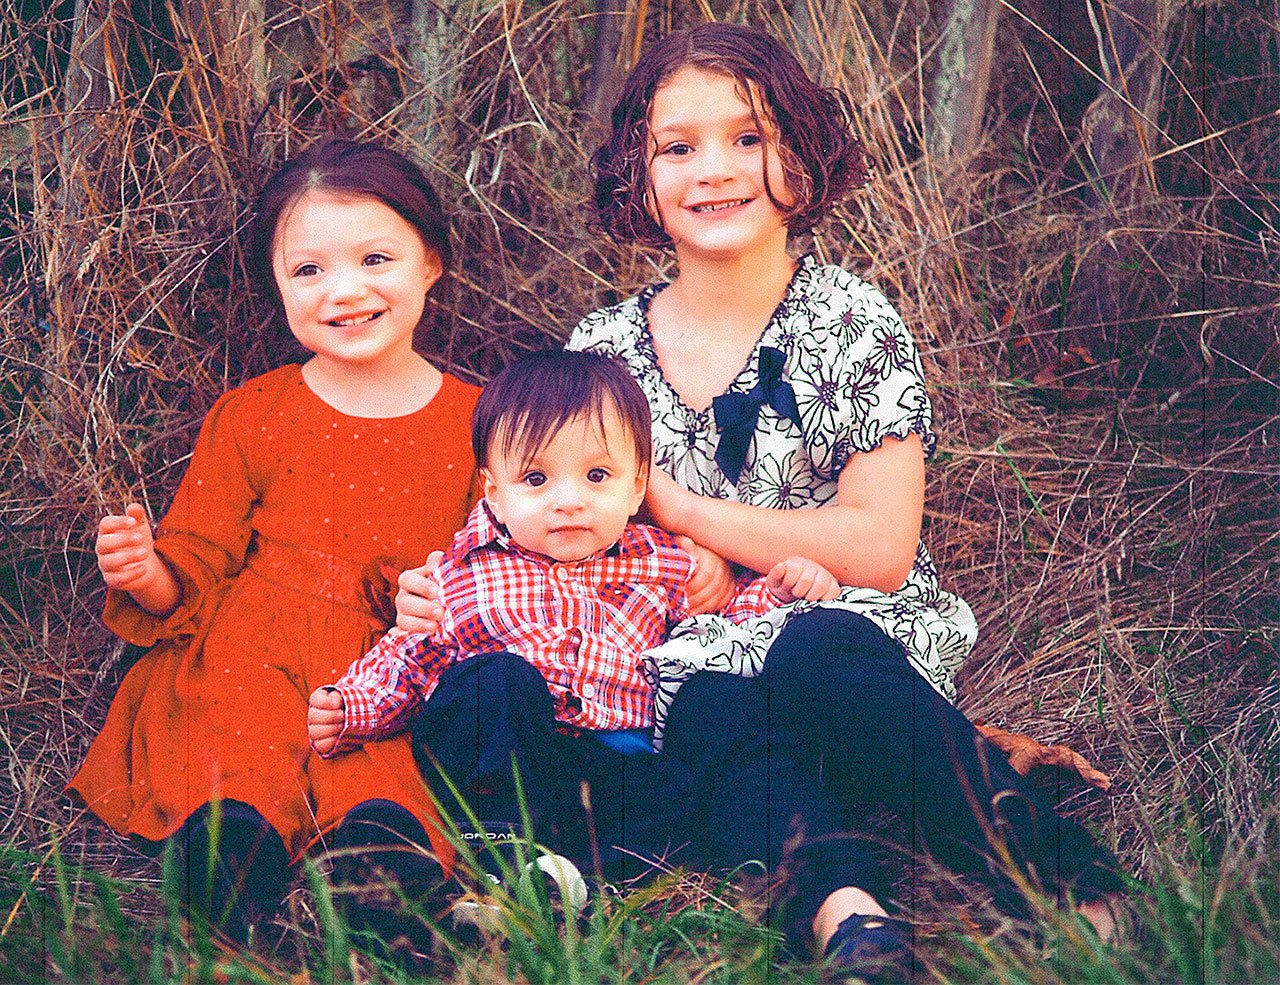 Ethan Edwards, center, is surrounded by his sisters Mia, left, and Alexis, in a photo taken in October. Photo provided